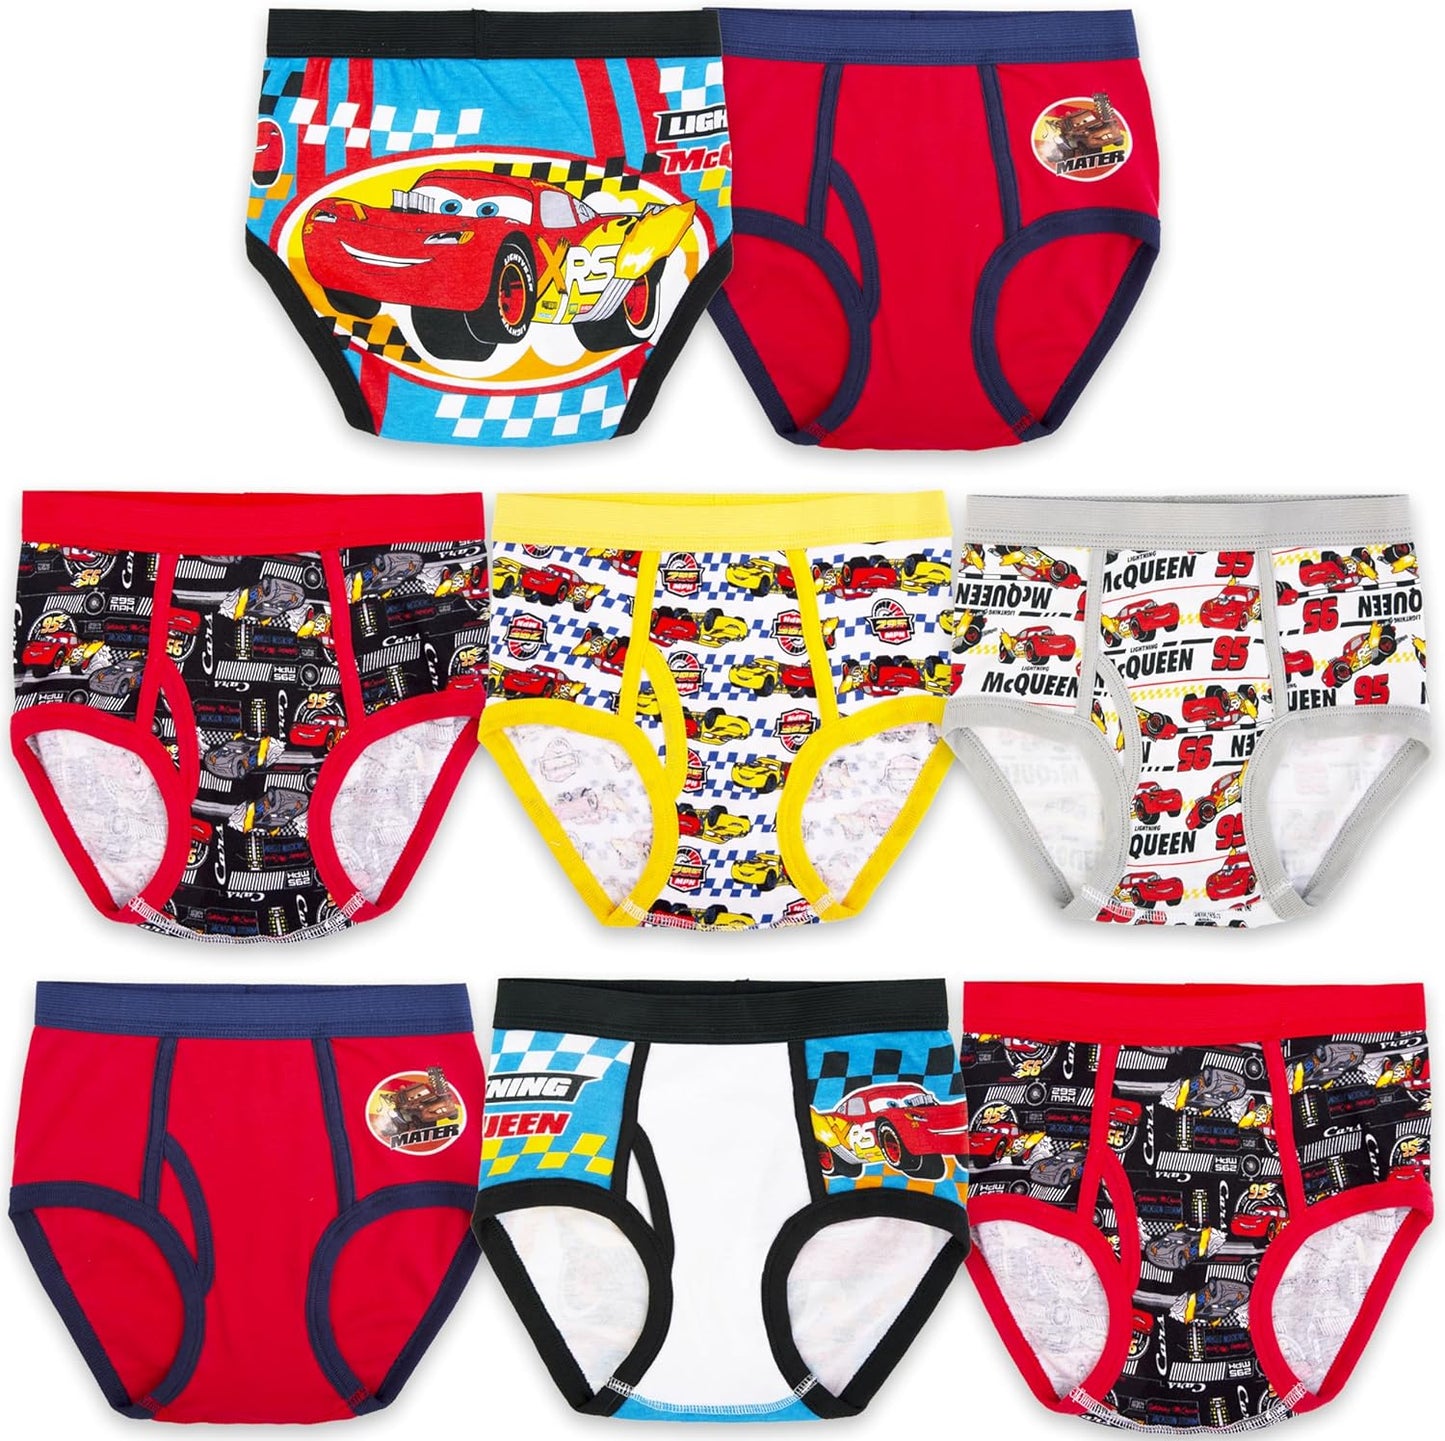 Disney Boys' Pixar Cars 100% Cotton Underwear with Lightning McQueen, Mater, Cruz & More Sizes 18m, 2/3t, 4t, 4, 6 and 8